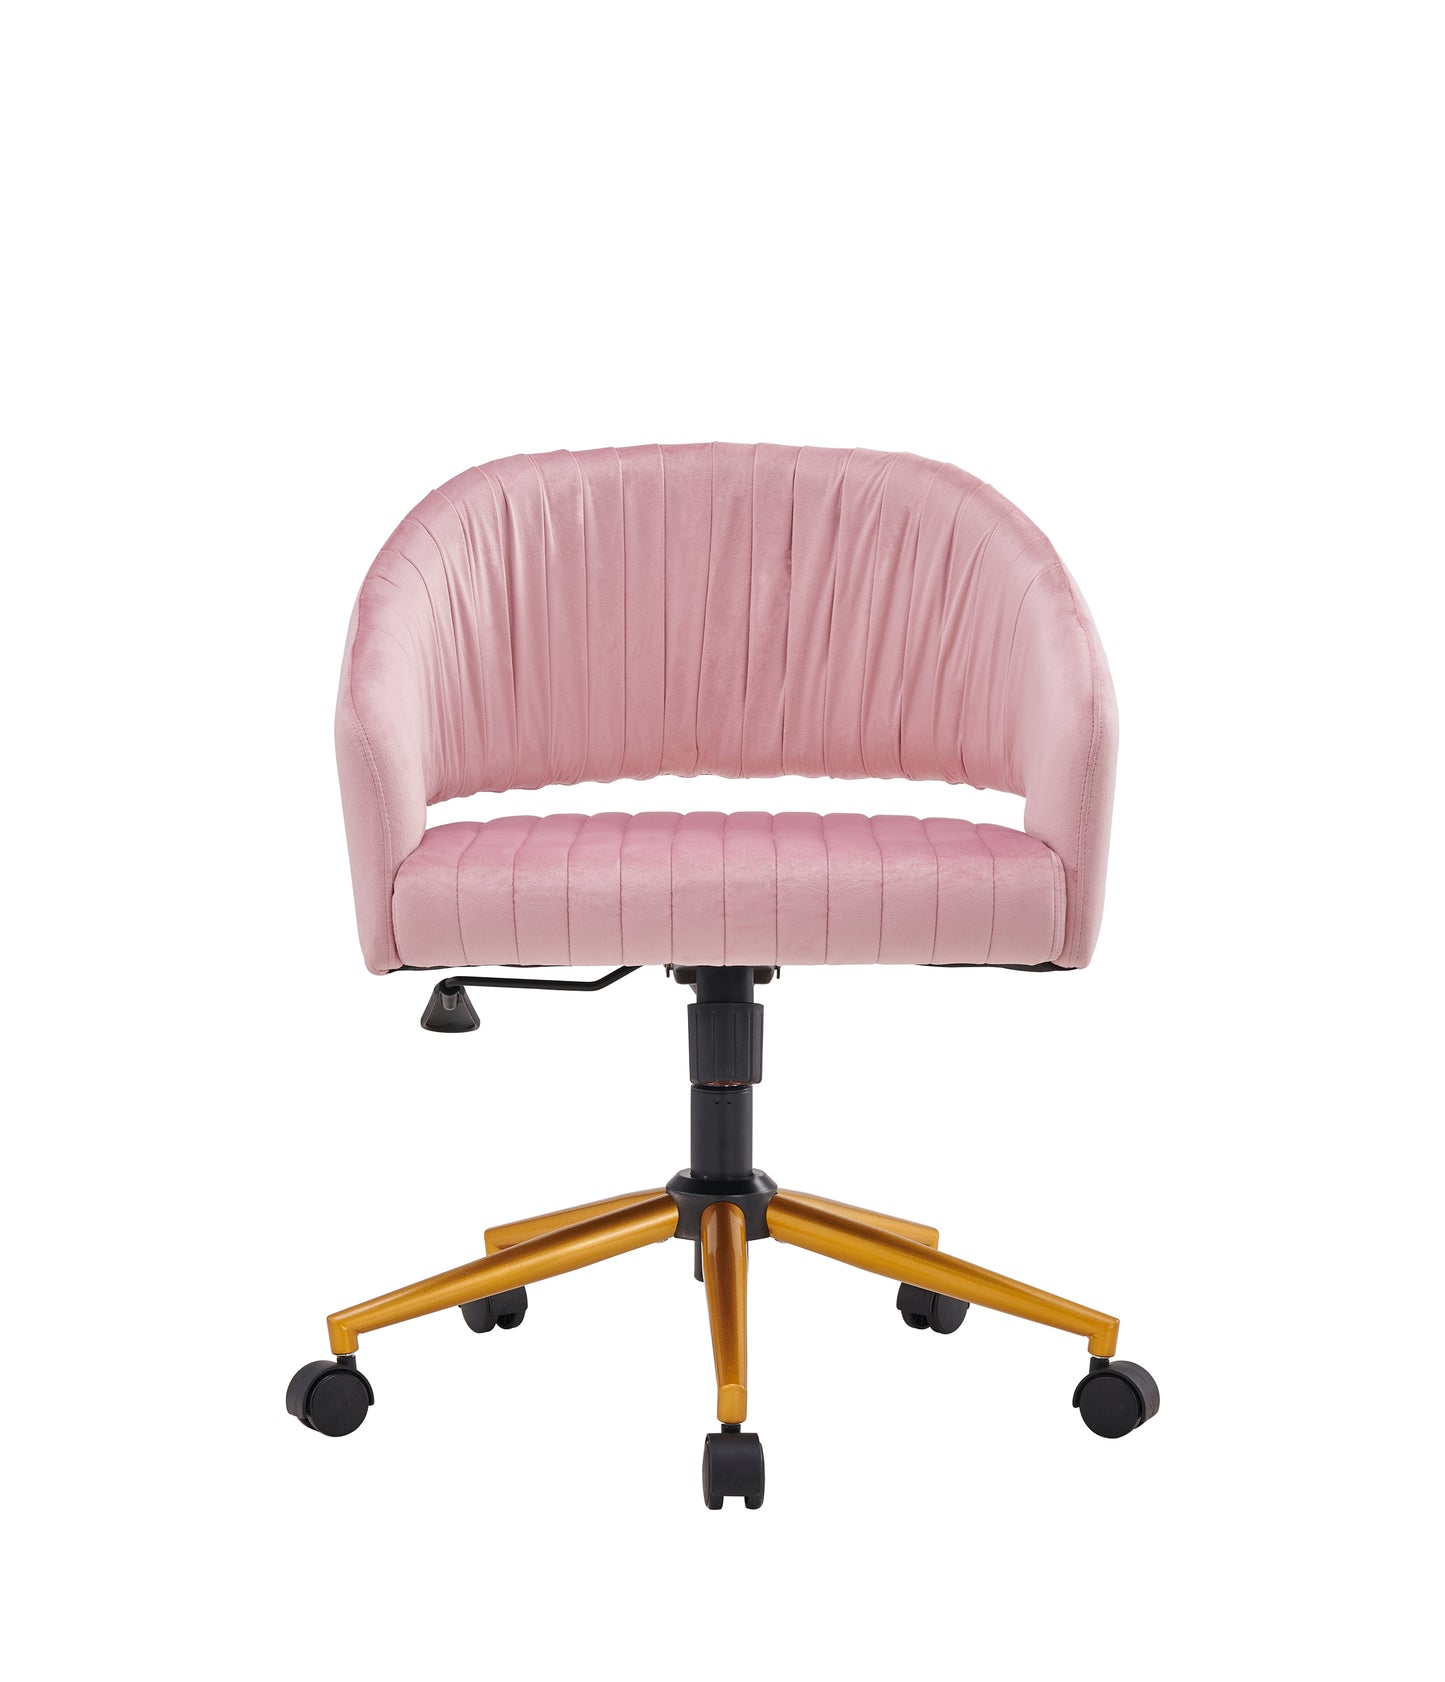 Modern swivel high quality velvet office desk chair pink color in gold metal luxury height adjustable computer chair living room chair